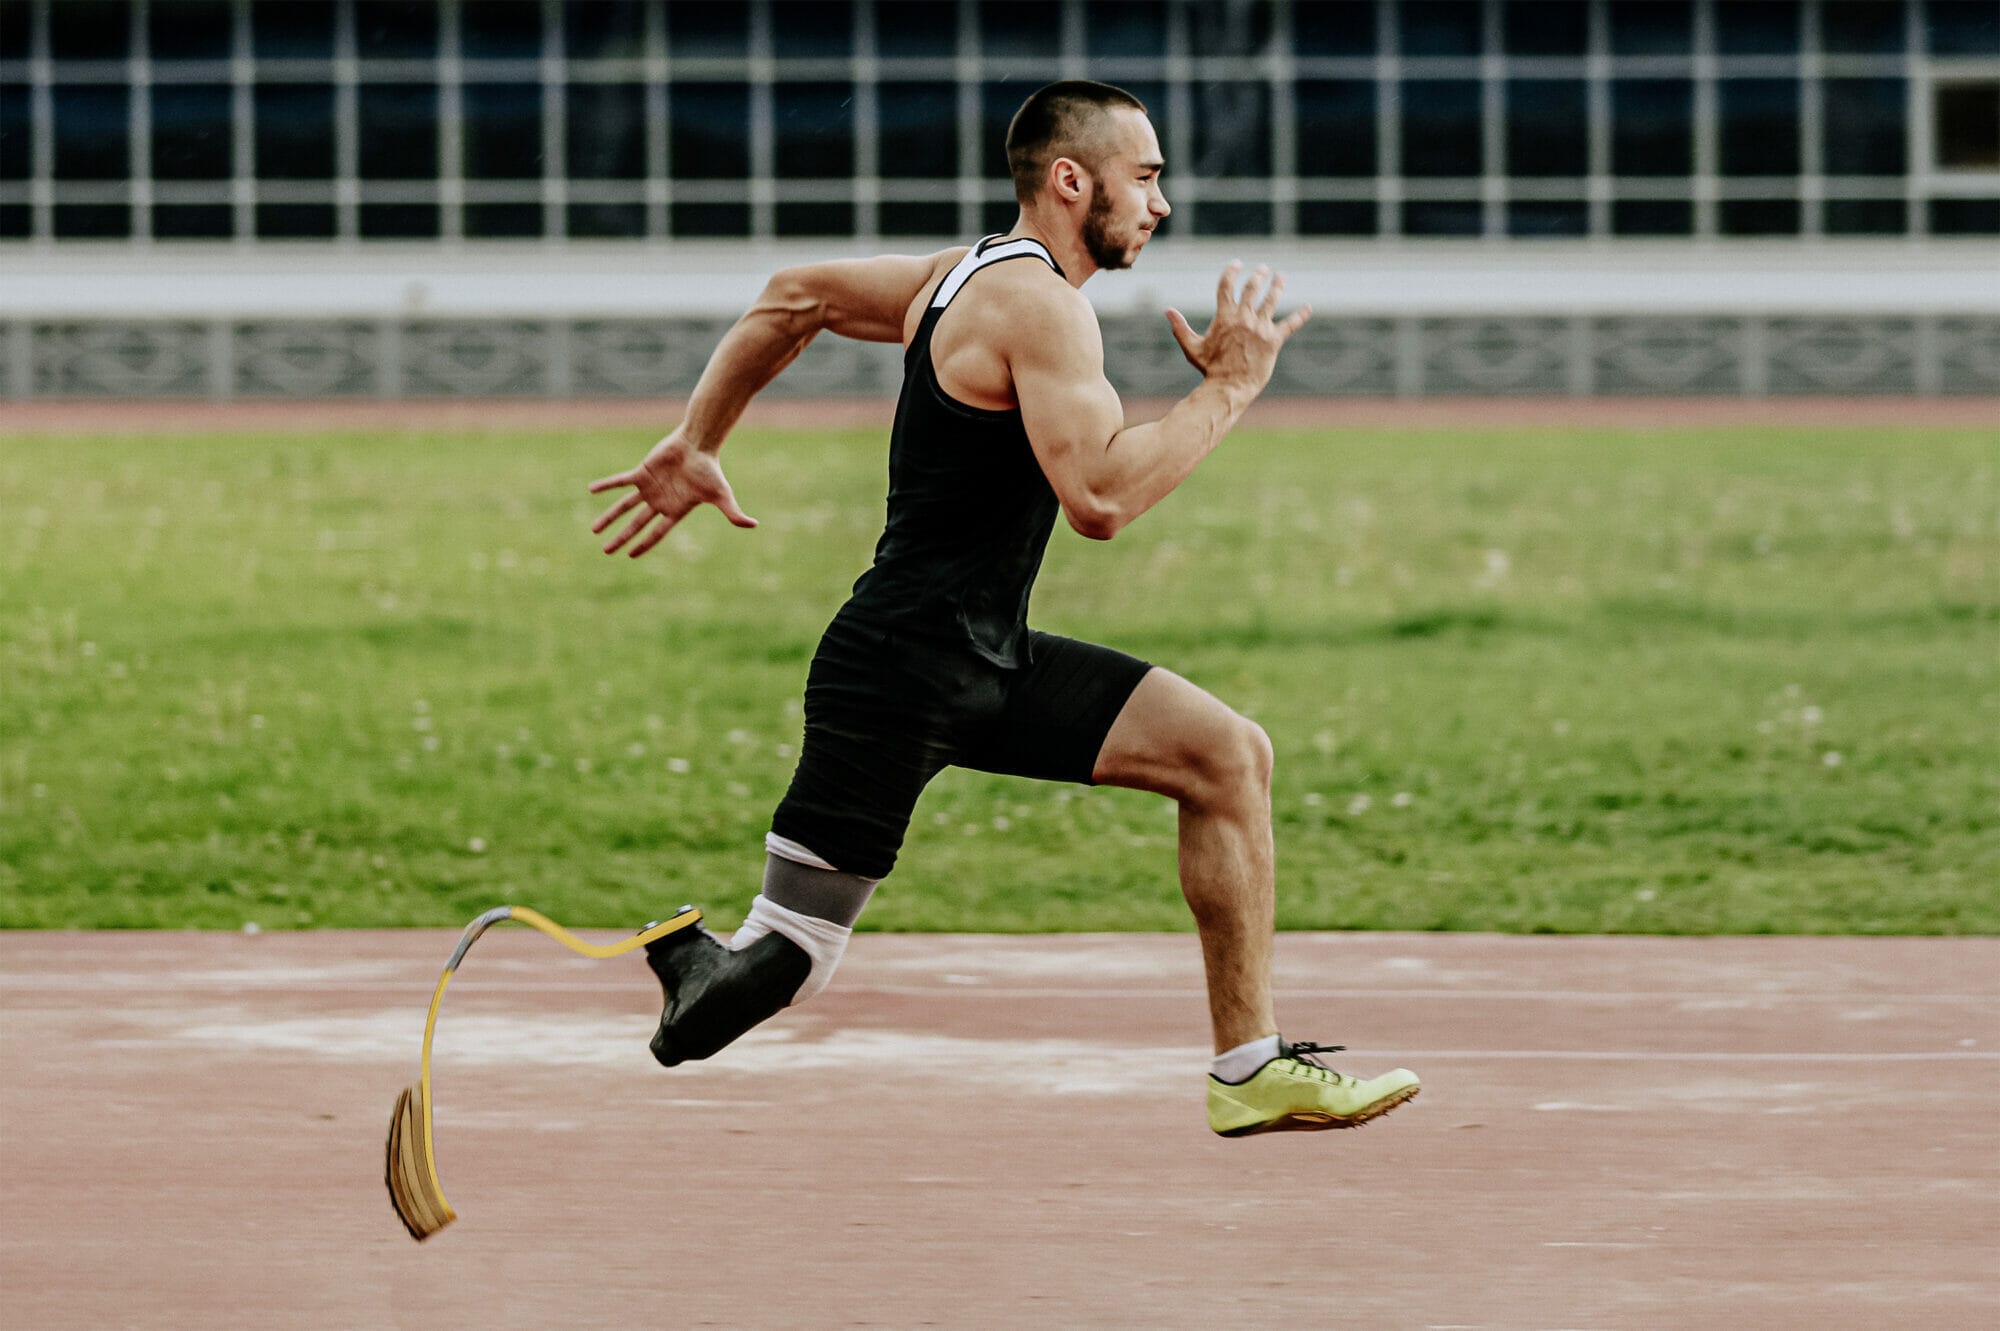 Athlete with prosthetic leg overcoming barrier with determination and strength